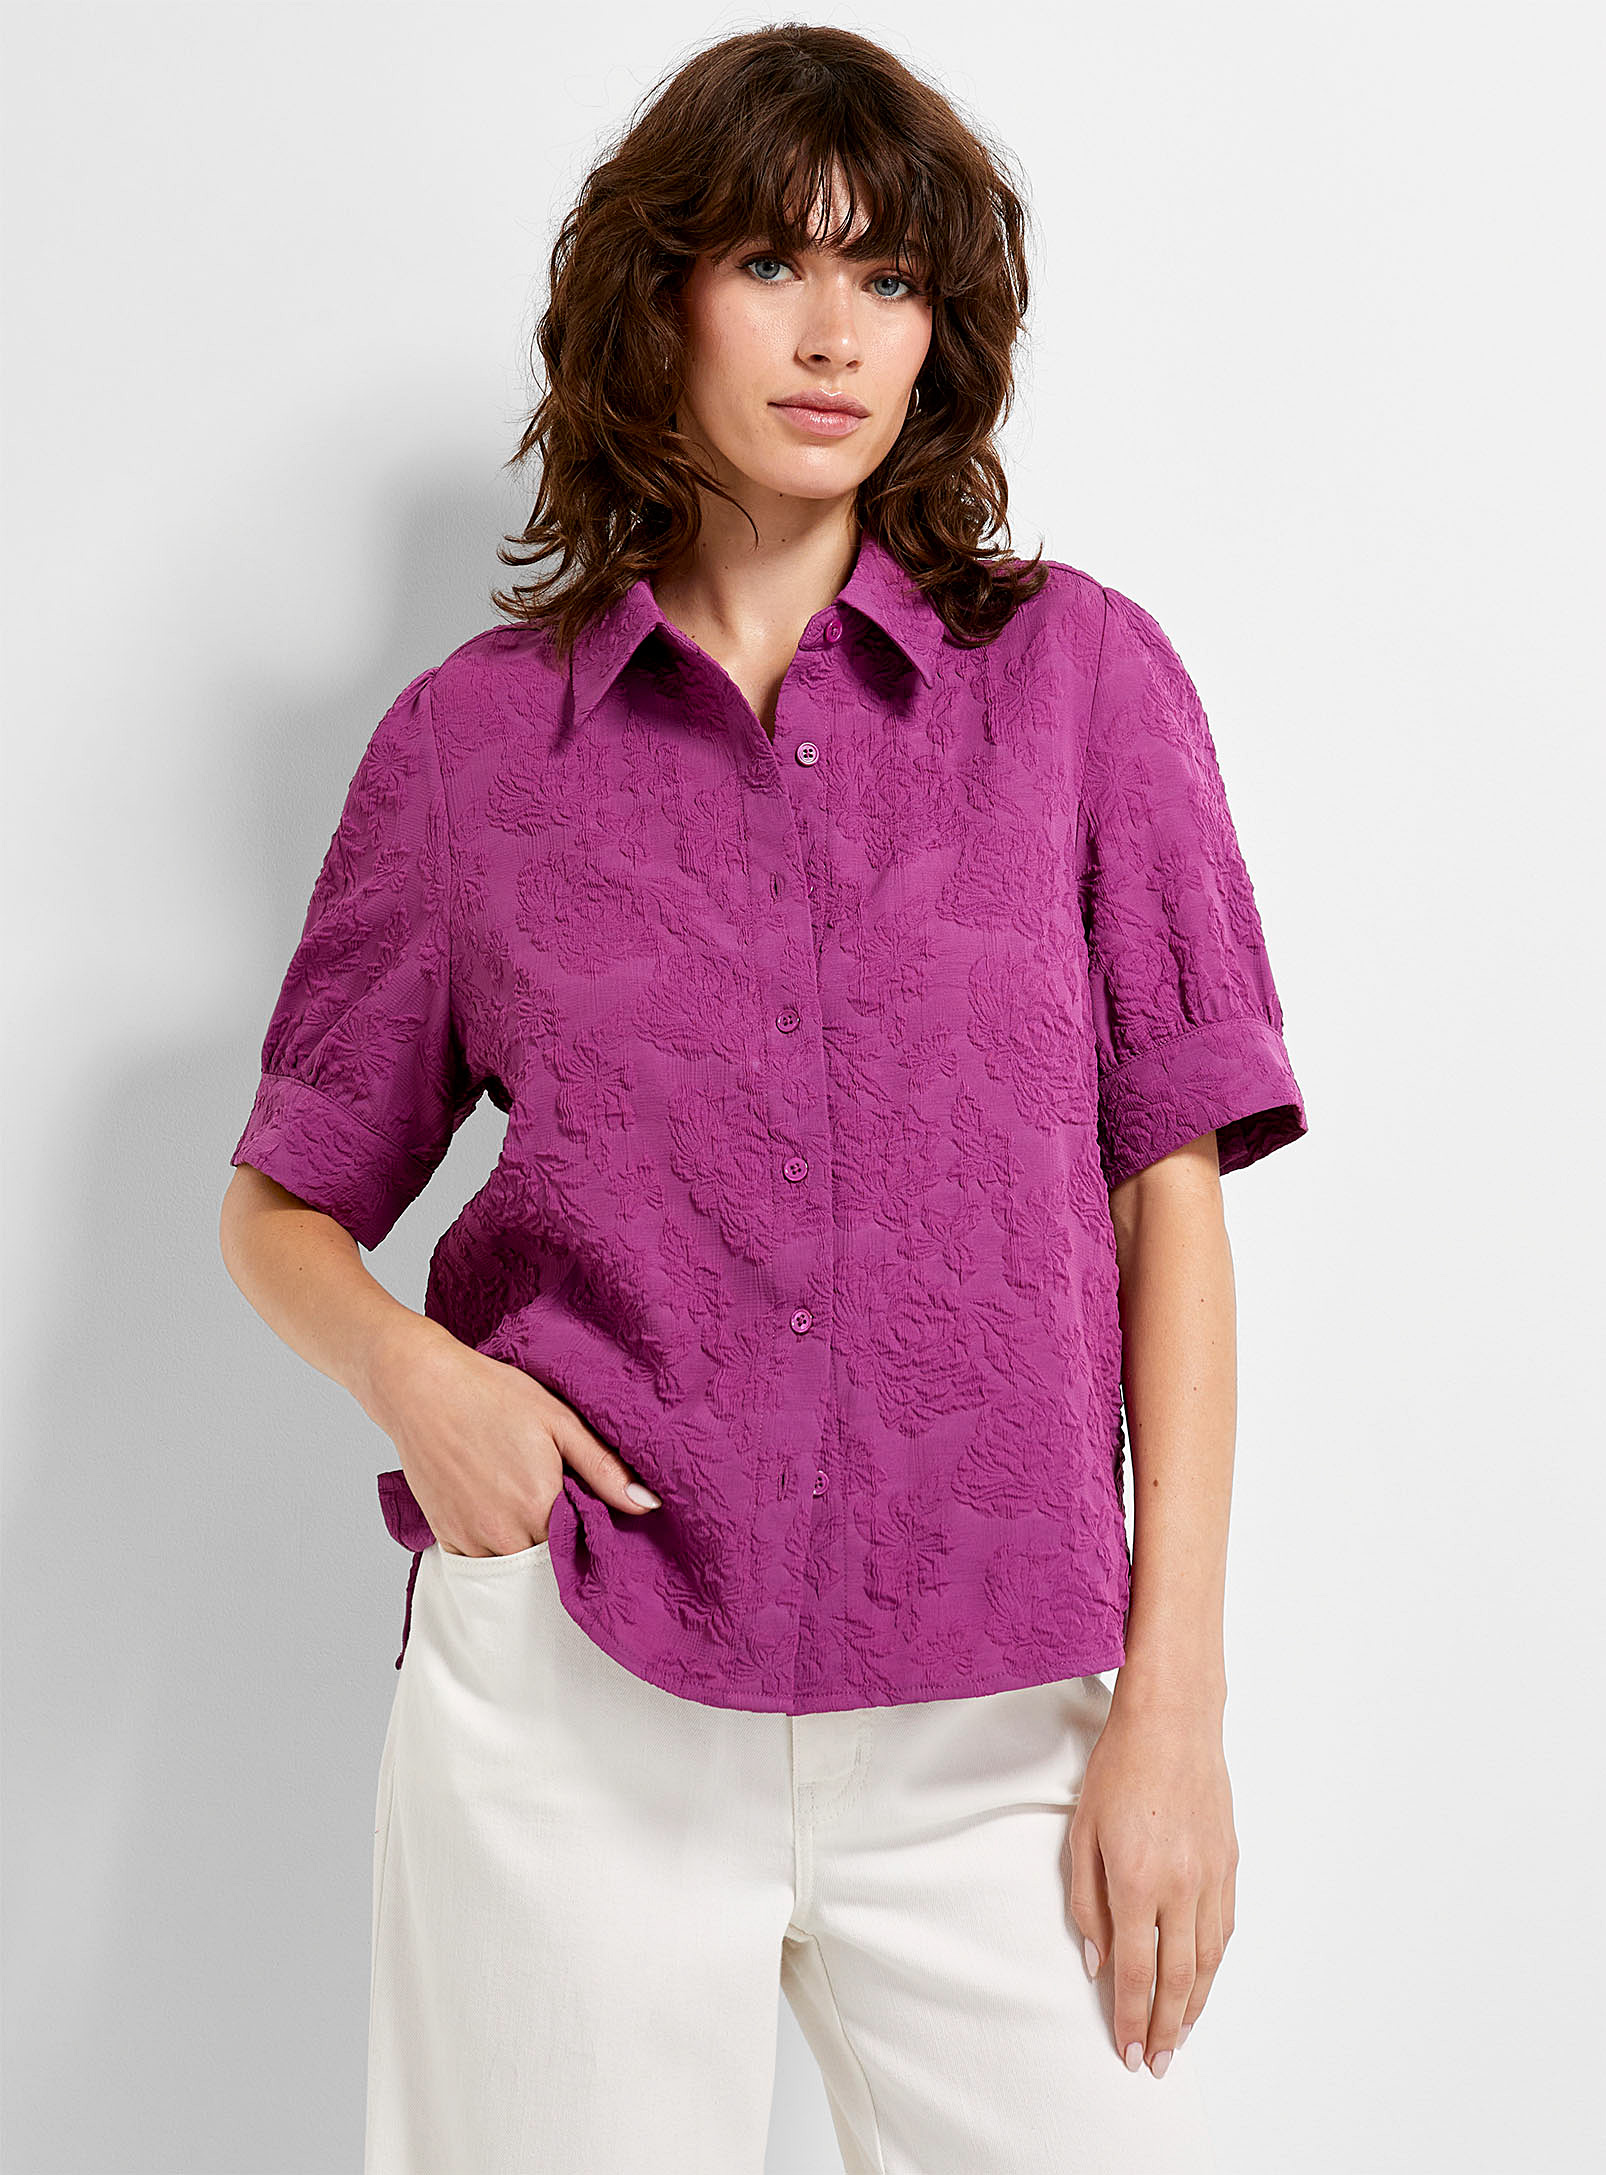 Contemporaine Embossed Floral Shirt In Purple